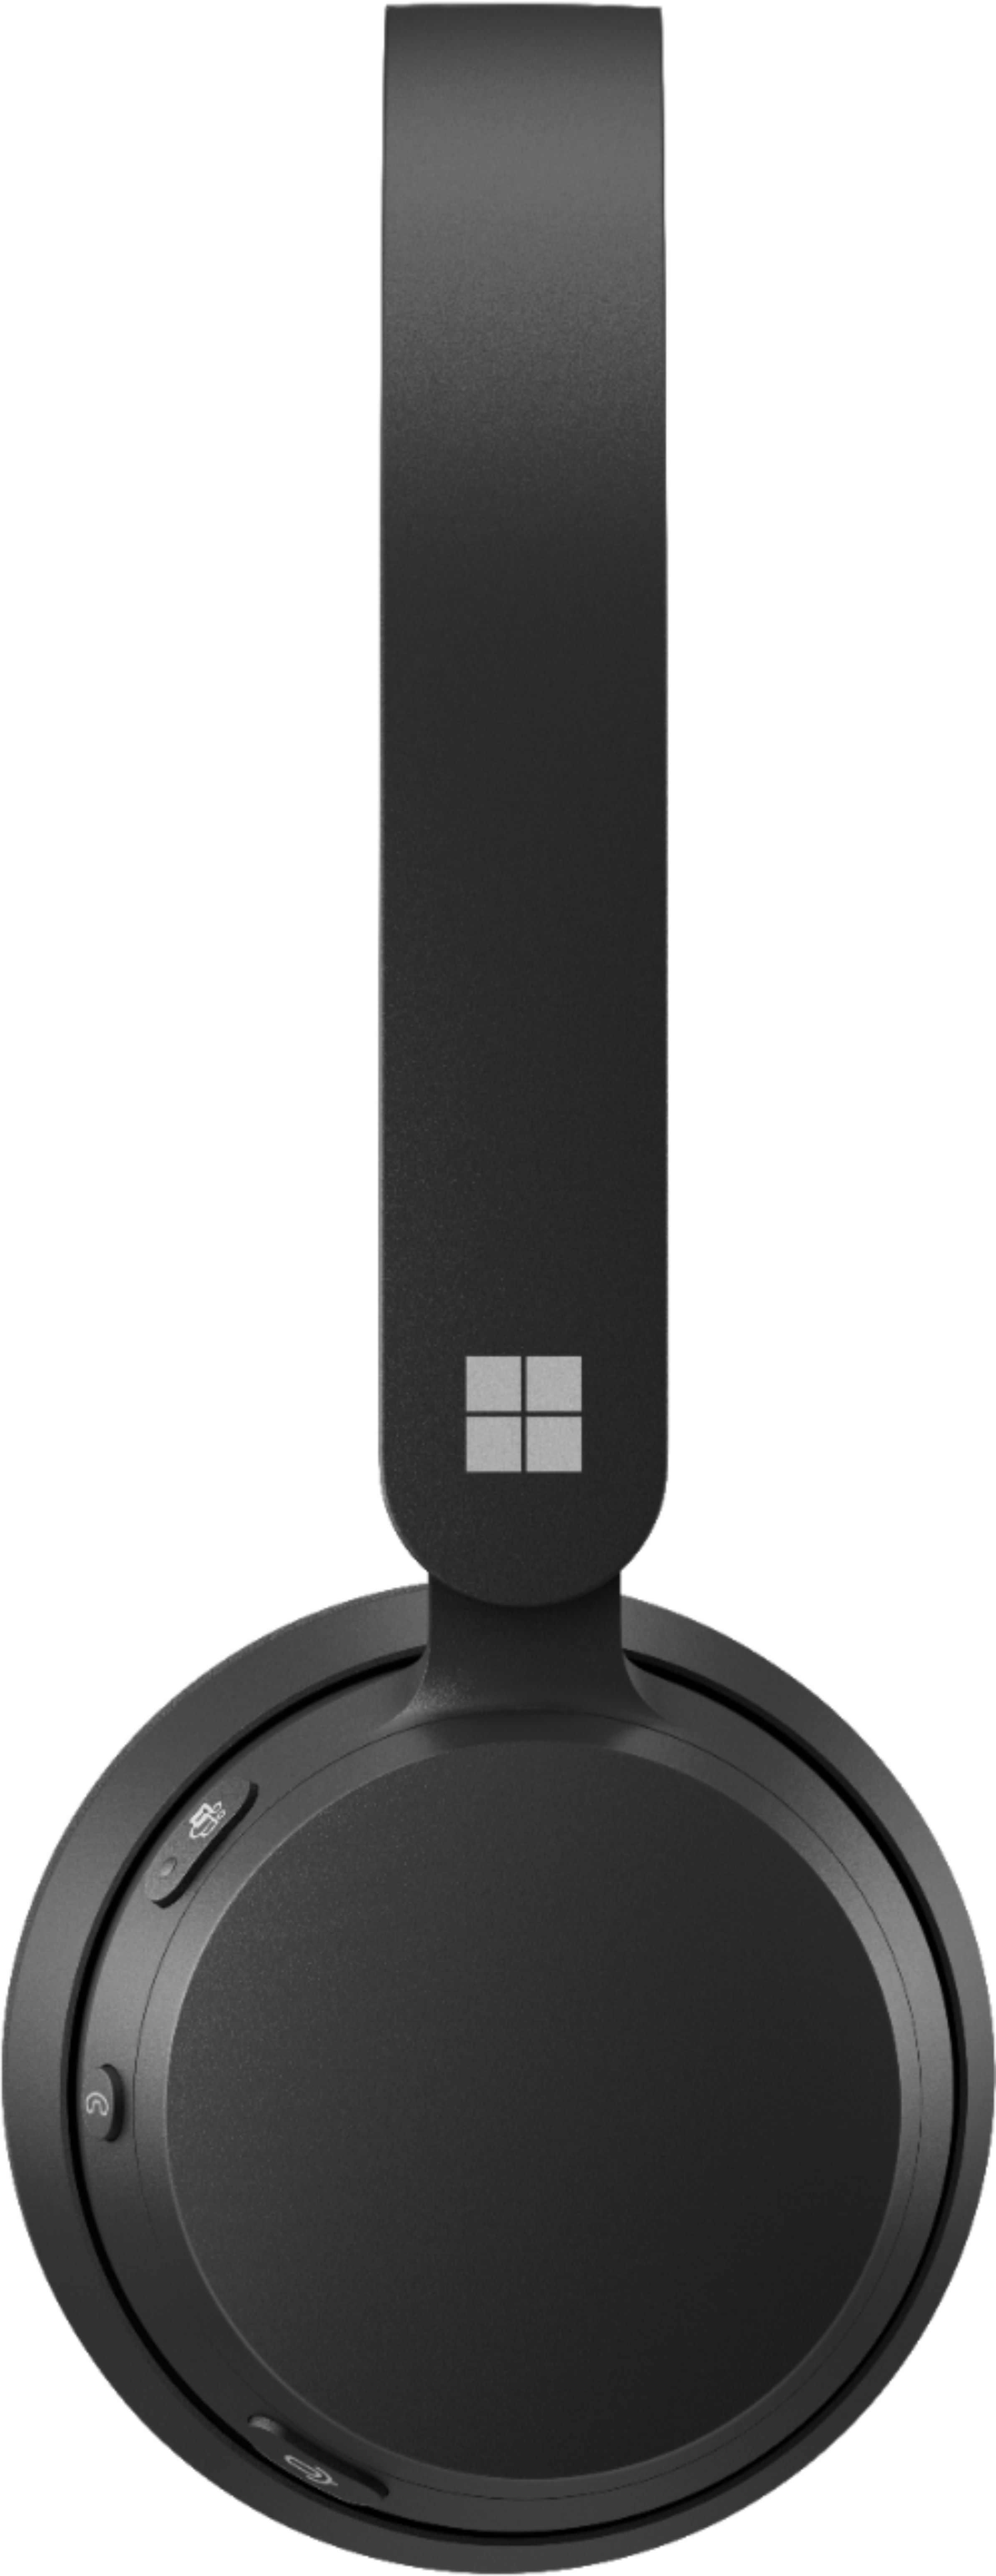 Microsoft - Modern Wireless Headset - On-Ear Headphones with Noise-Reducing  Microphone, for Teams & Zoom - Black